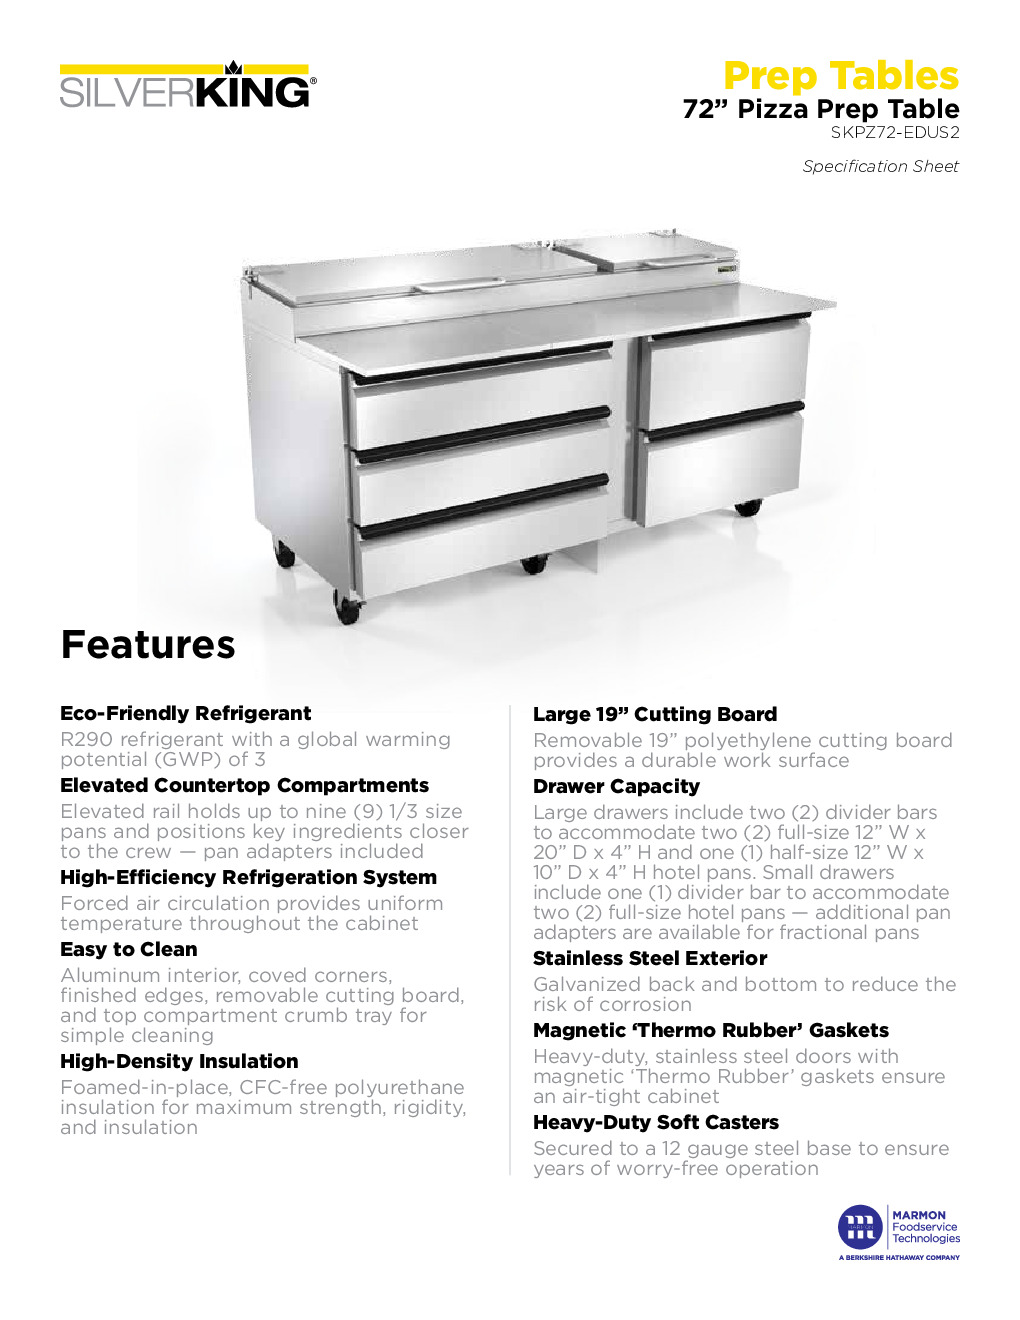 Silver King SKPZ72-EDUS2 Pizza Prep Table Refrigerated Counter